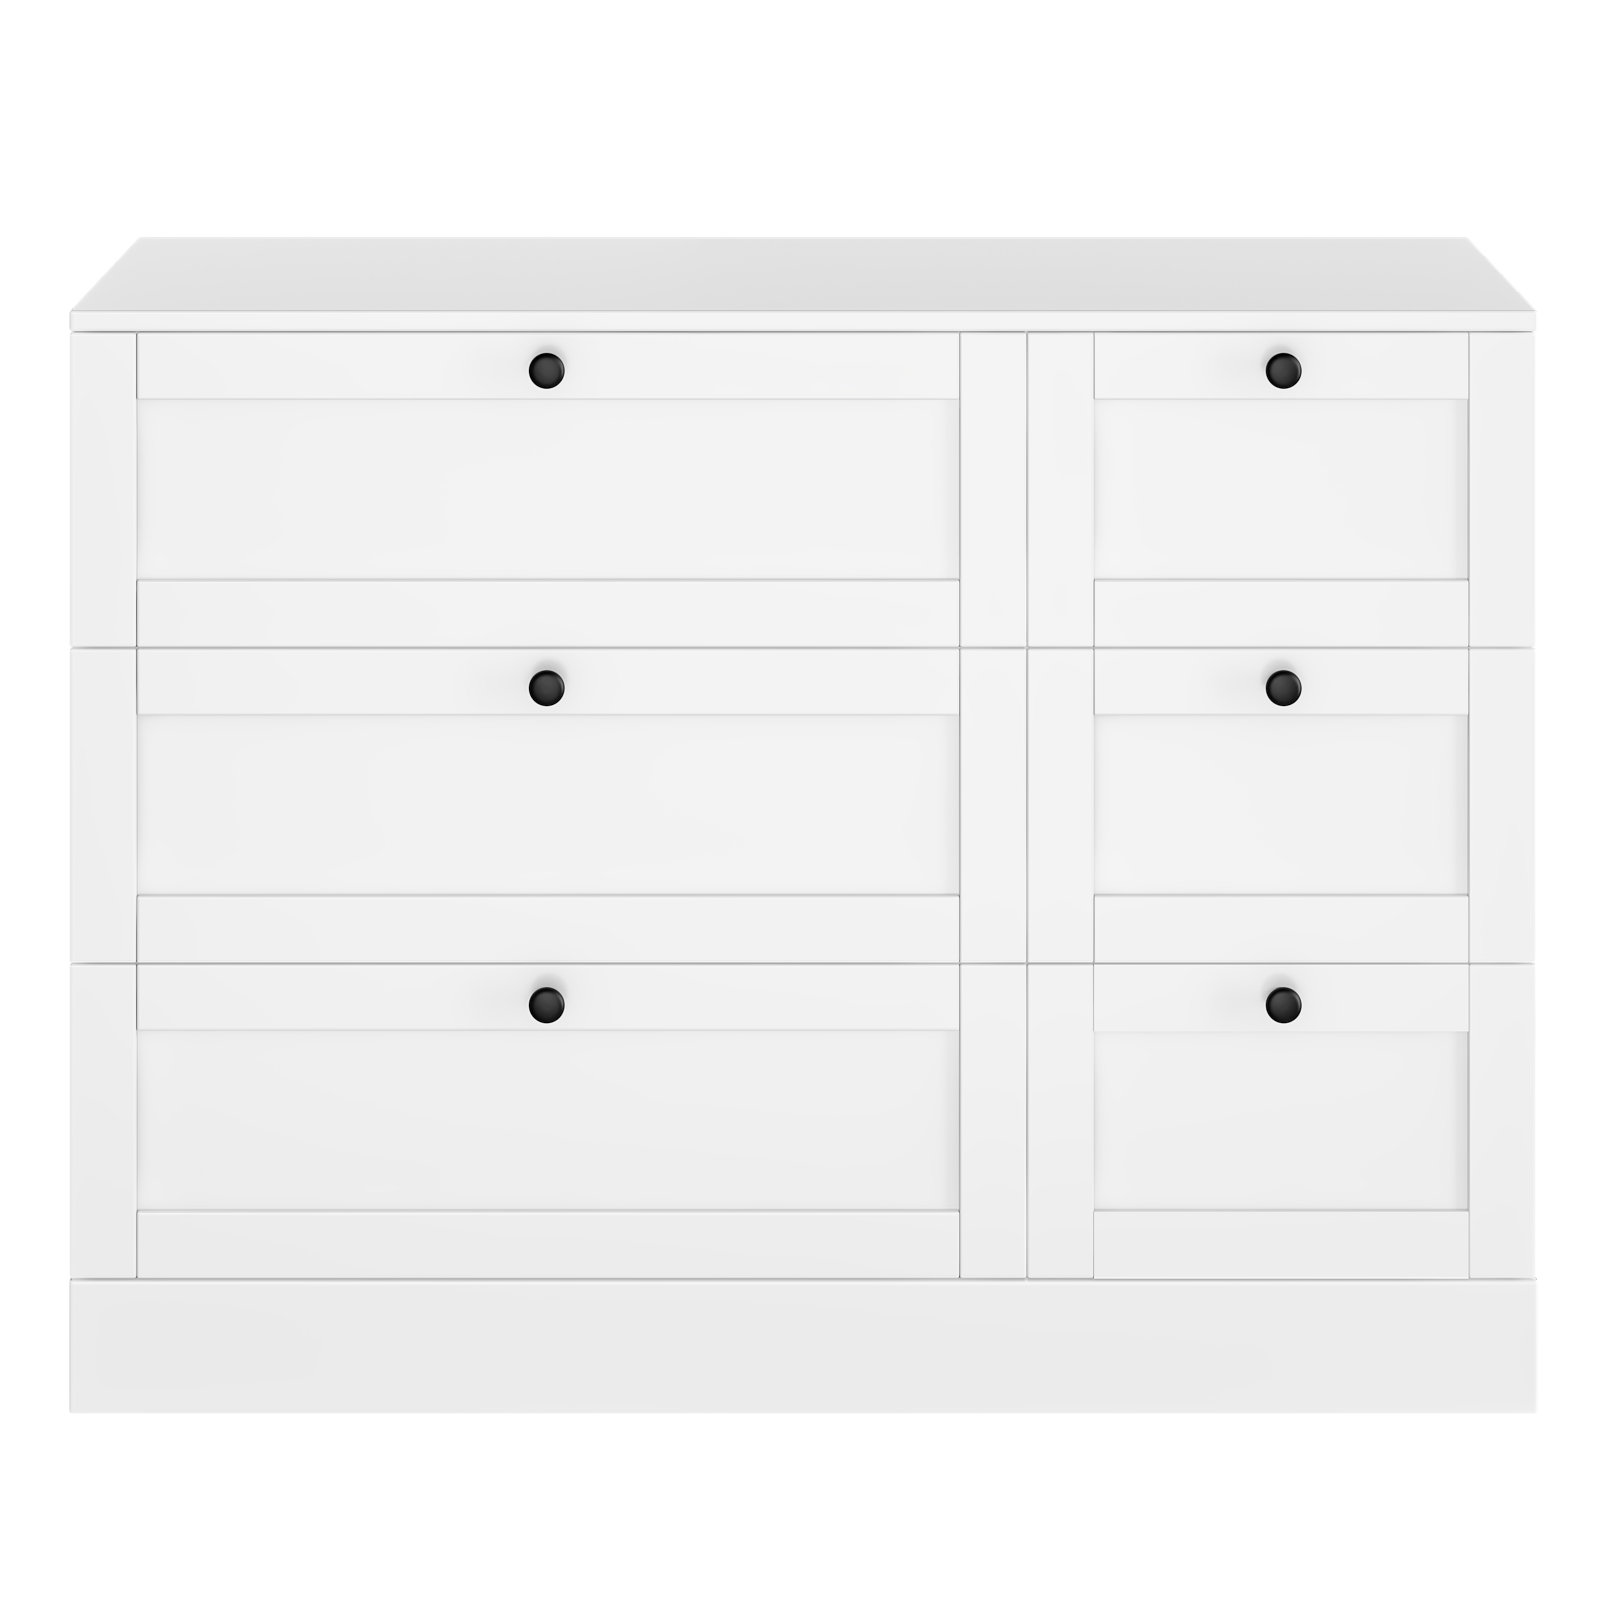 Homfa 6 Drawer White Double Dresser, Wood Storage Cabinet Chest of Drawers for Bedroom Living Room - image 5 of 7